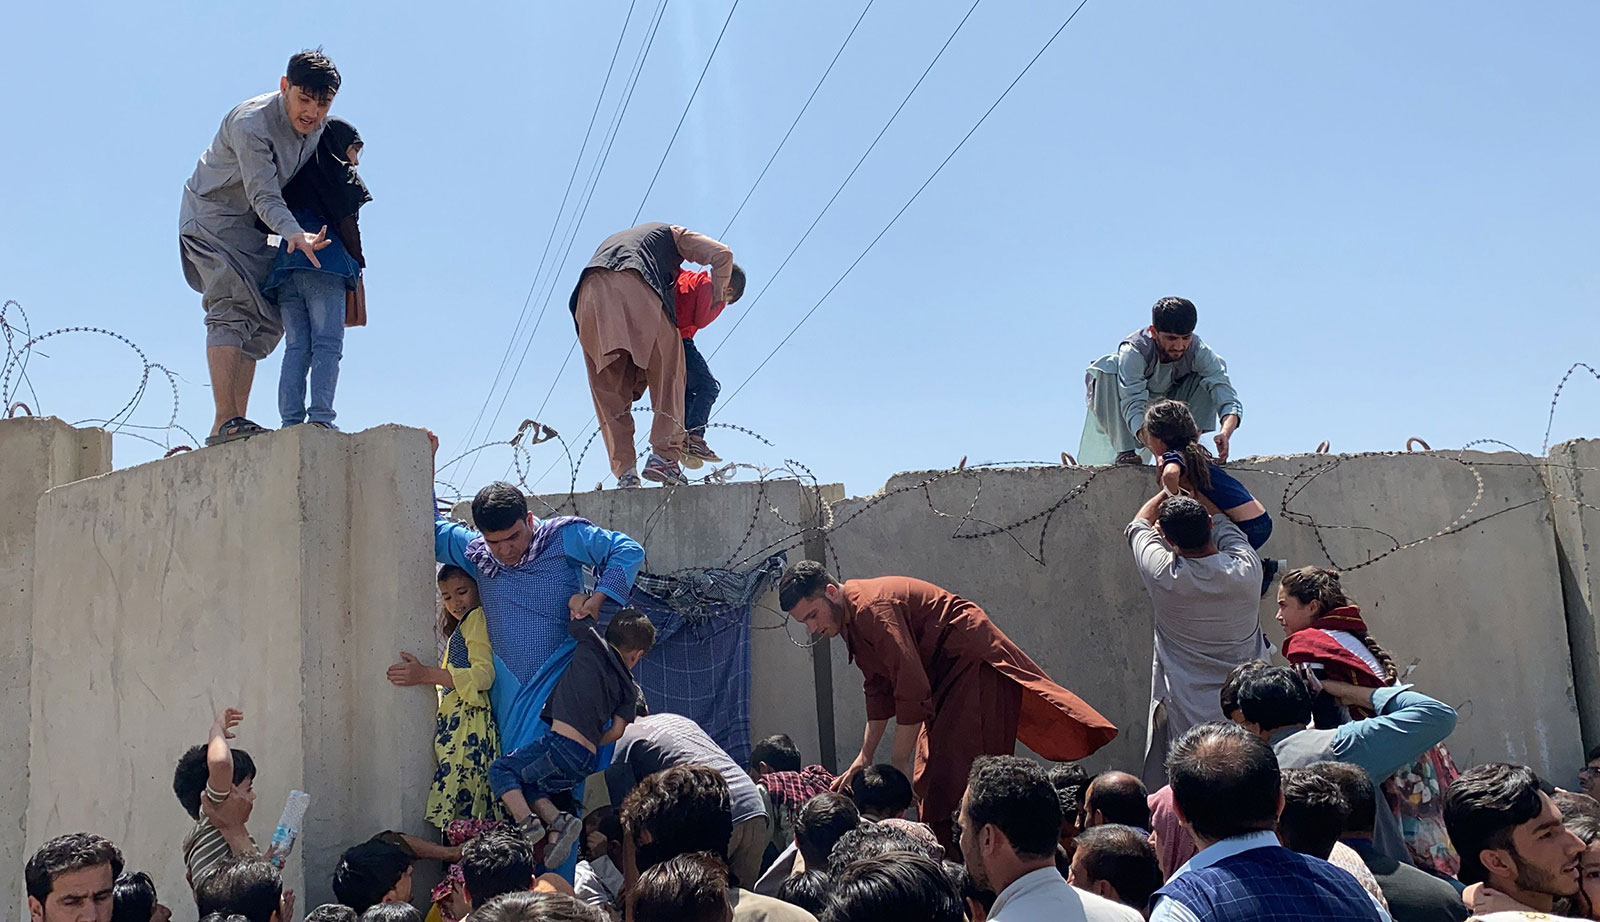 People struggle to cross the boundary wall of Kabul's Hamid Karzai international airport on August 16.